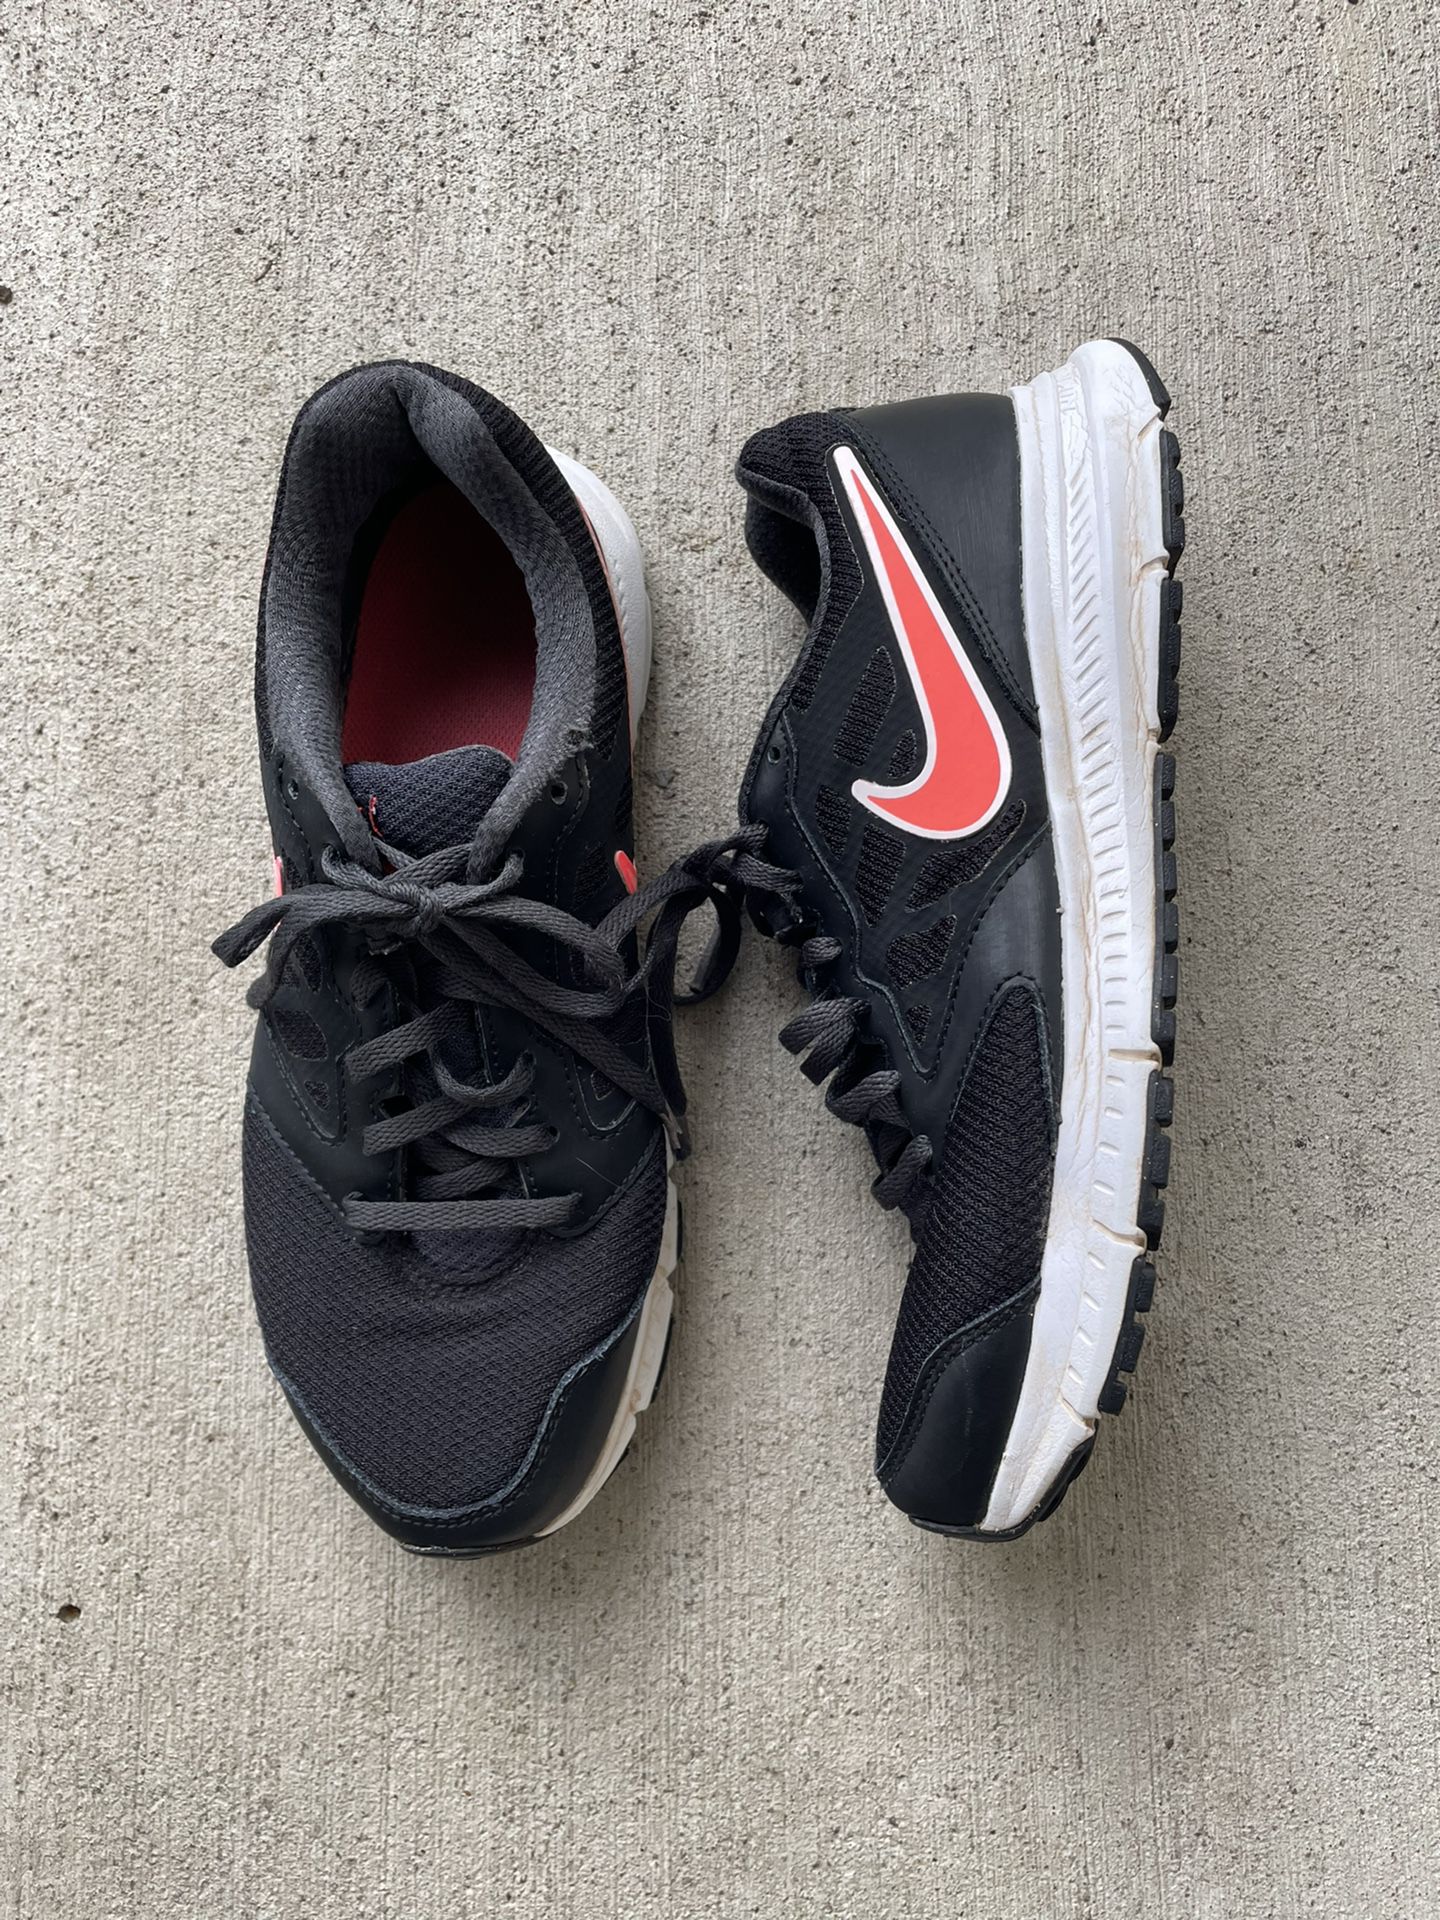 Nike 'downshifter 684765-002 Black Coral Sneakers size 8.5 for Sale Vancouver, WA - OfferUp